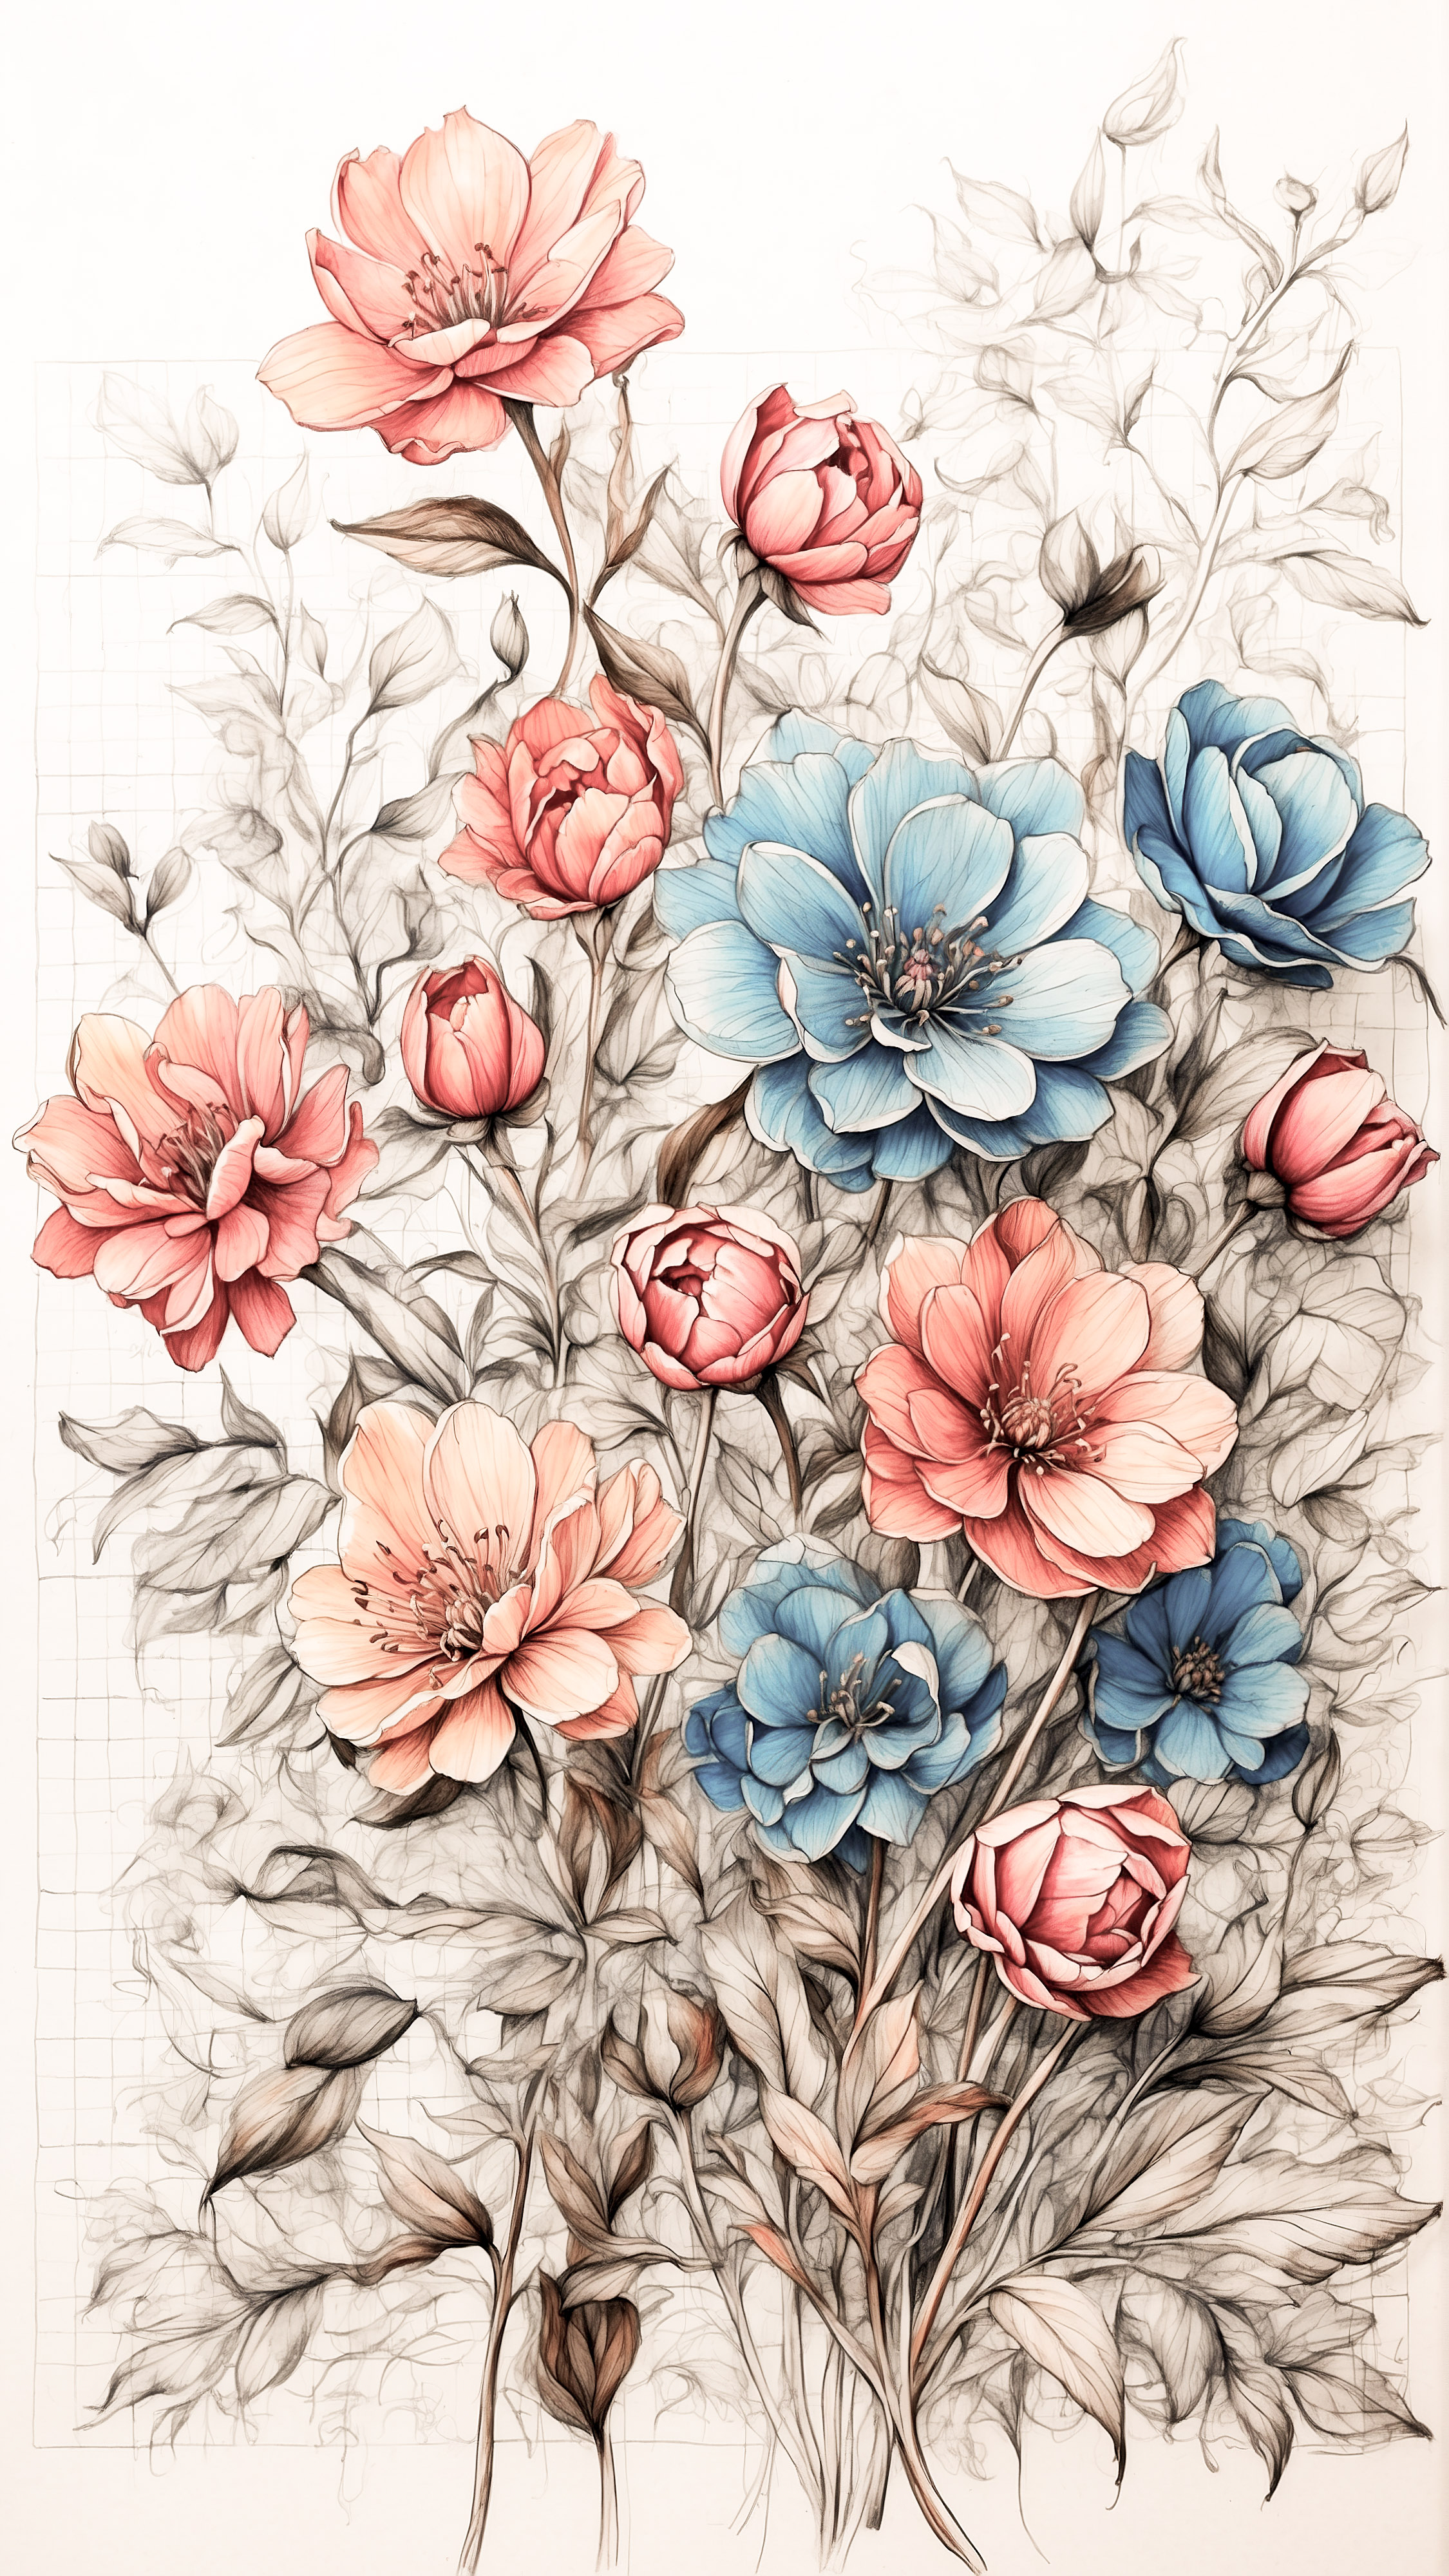 Admire the simplicity of hand-drawn flowers against a predominantly white background, with a cute background designed for your iPhone.